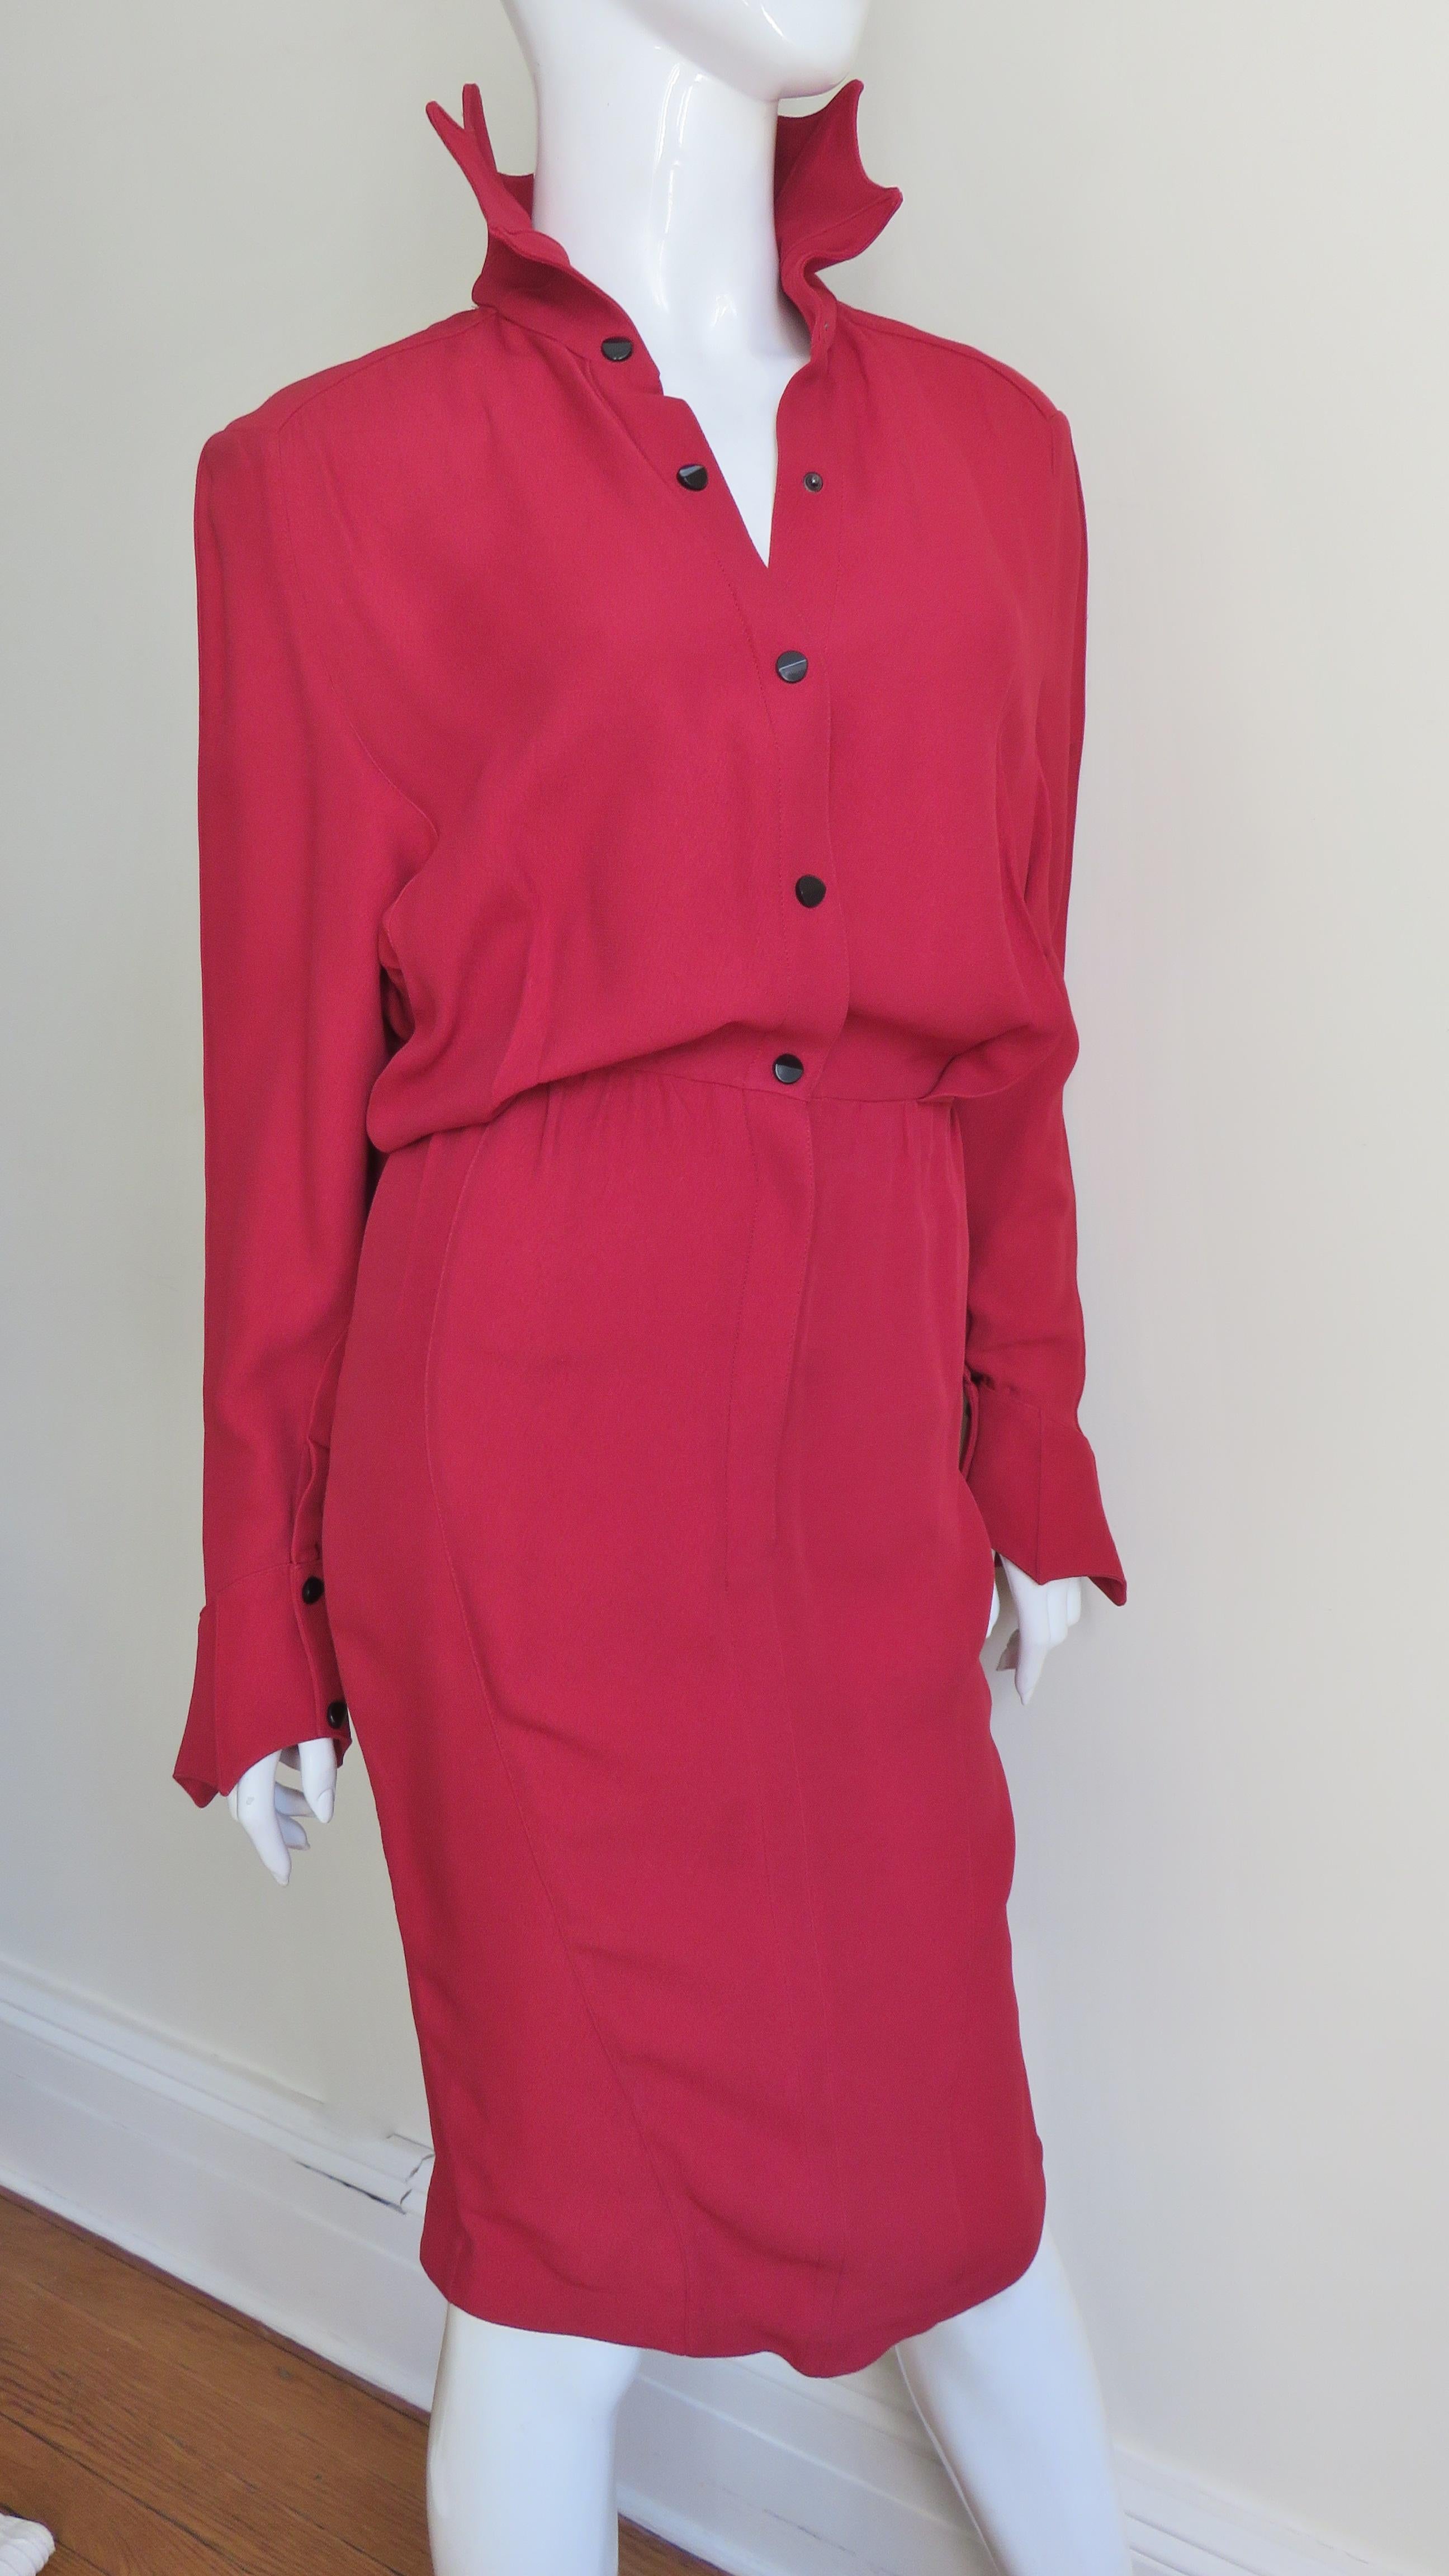 Thierry Mugler Dress with Pointed Collar and Cuffs 1980s For Sale 2